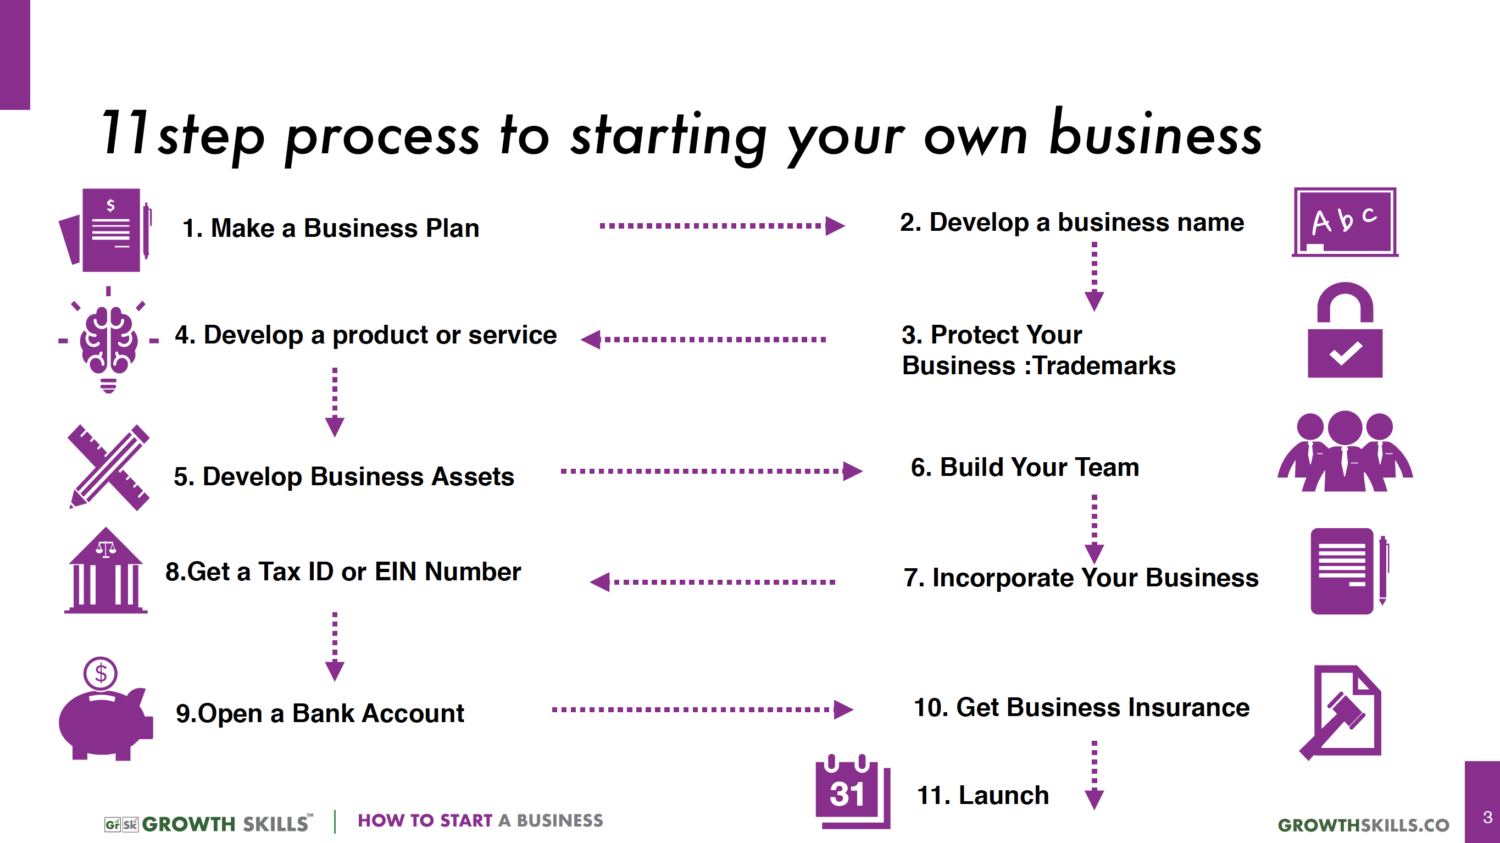 How to start a business process